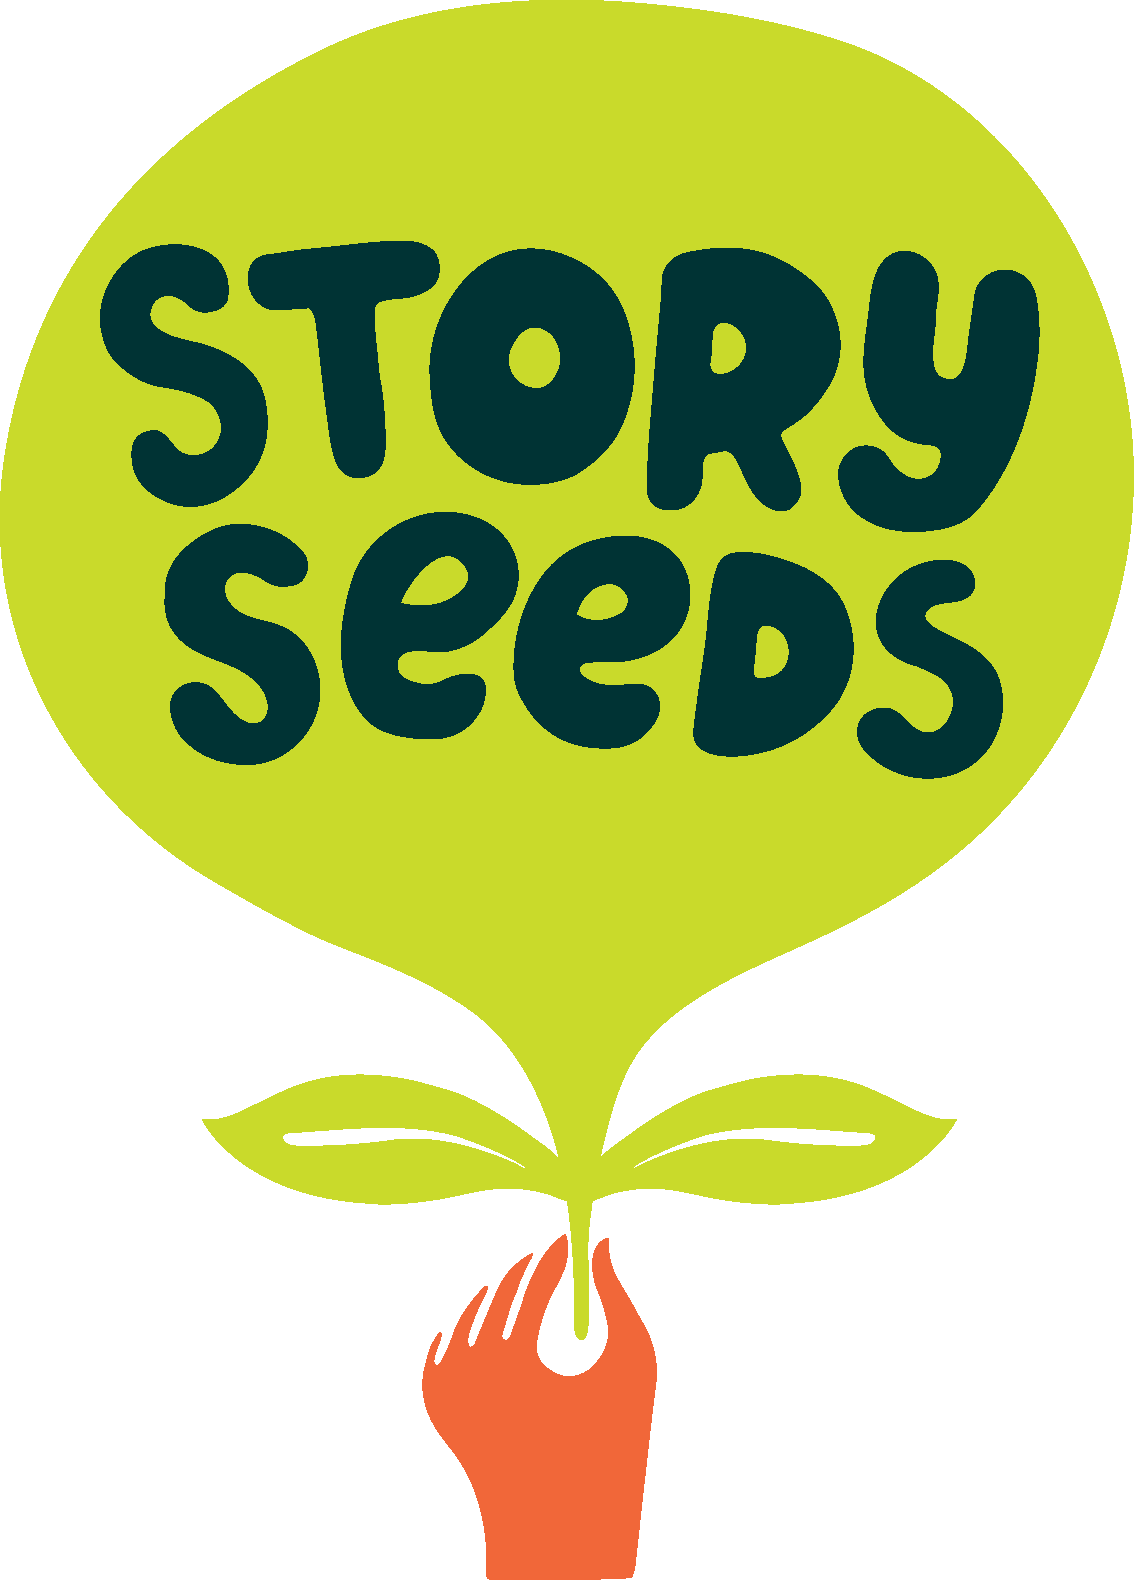 The Story Seeds Podcast